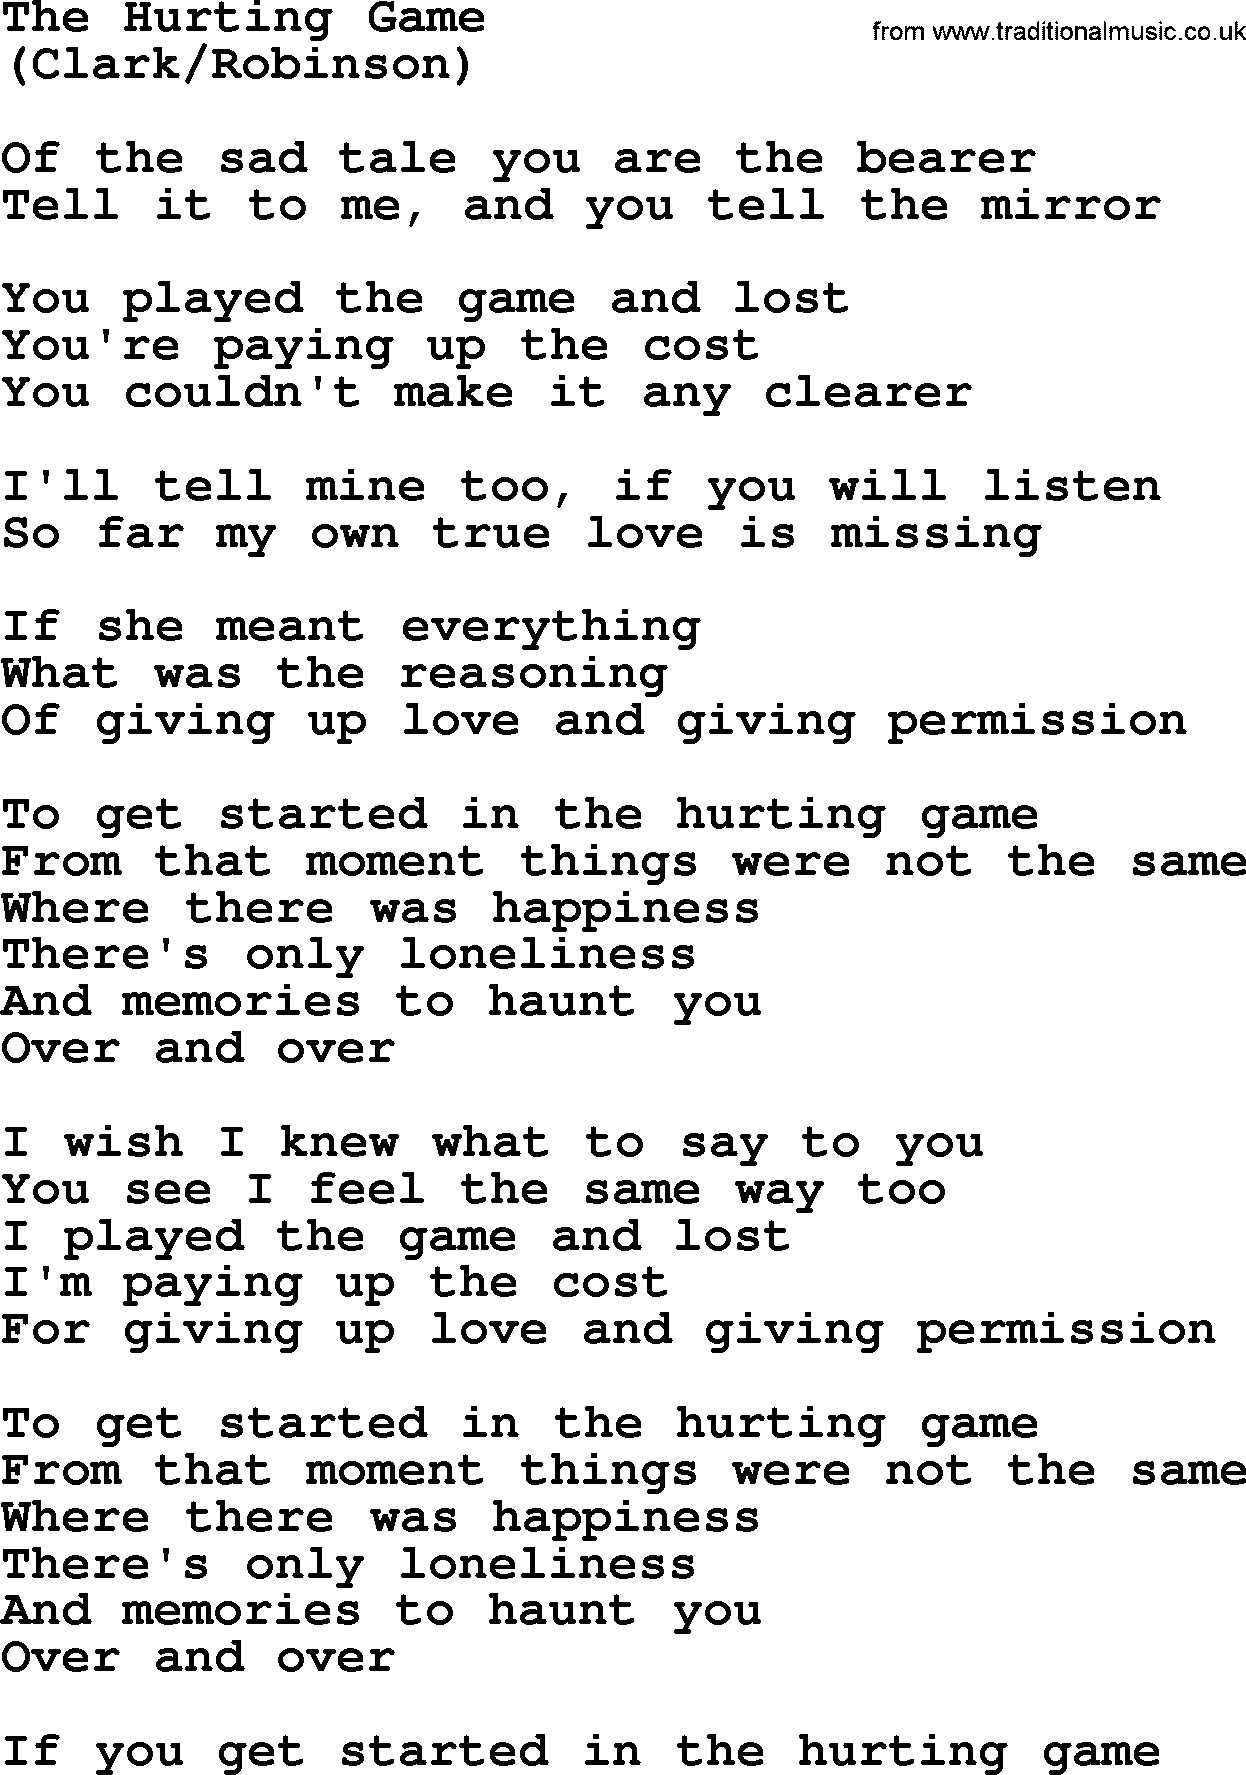 The Byrds song The Hurting Game, lyrics